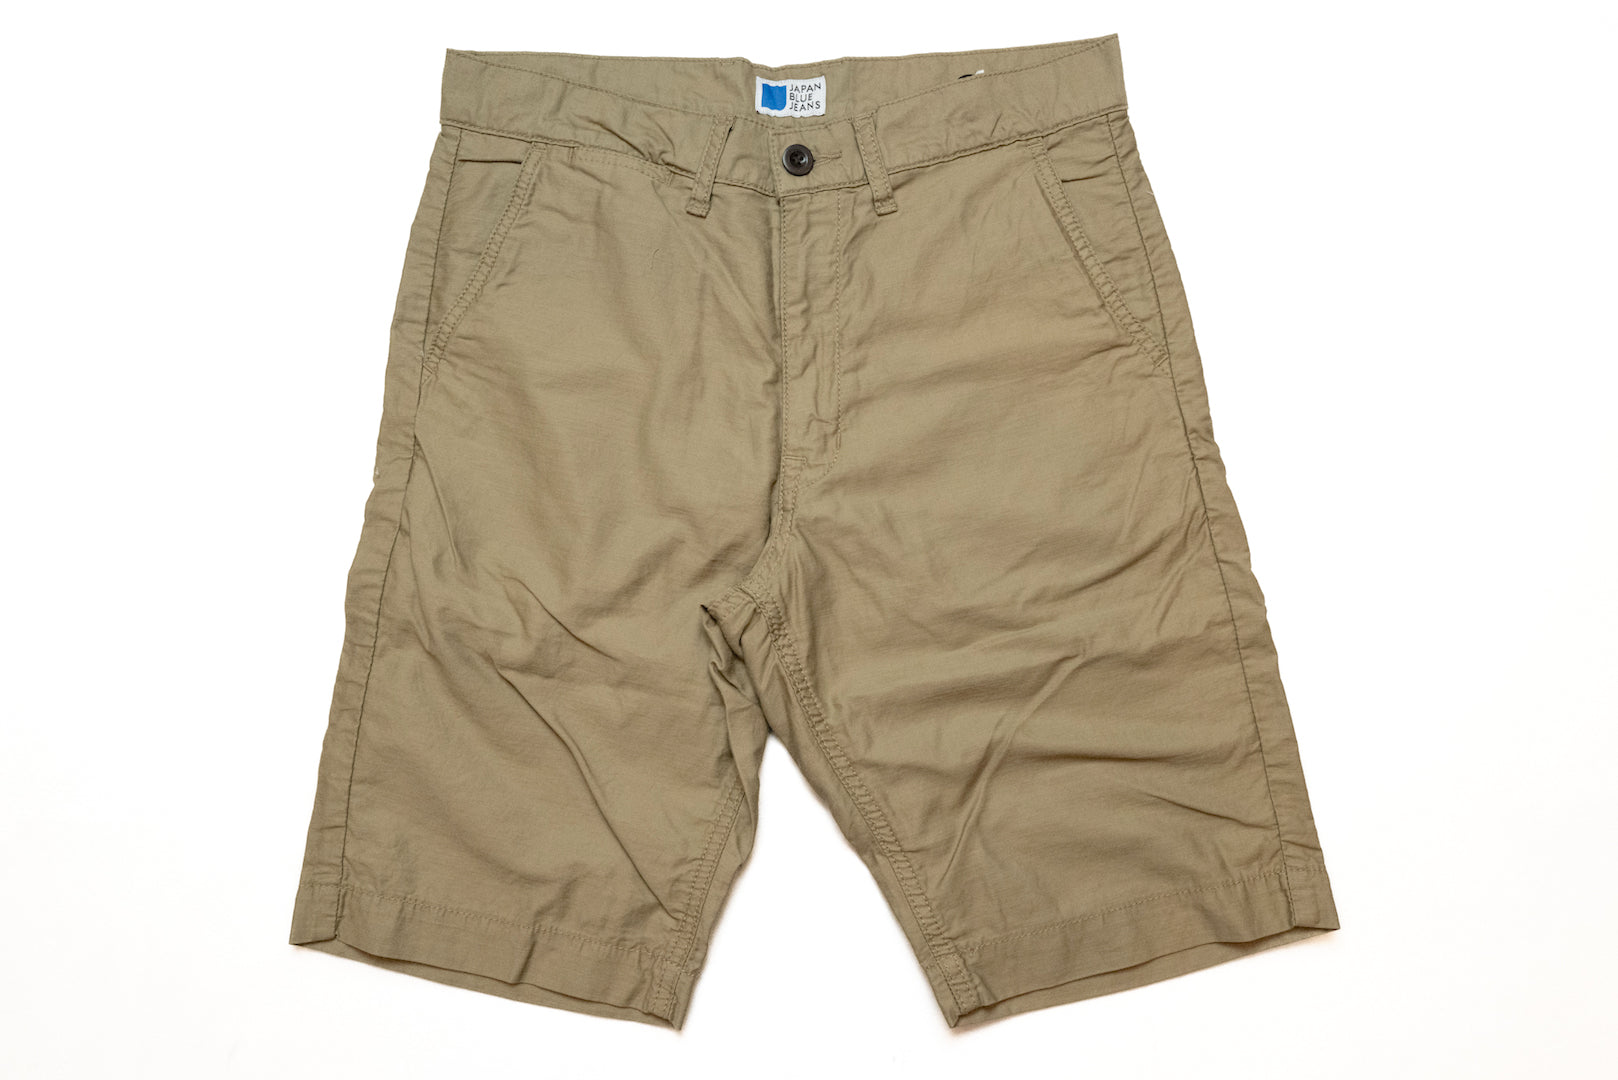 Japan Blue X CORLECTION Military Sateen Shorts (Light Brown)